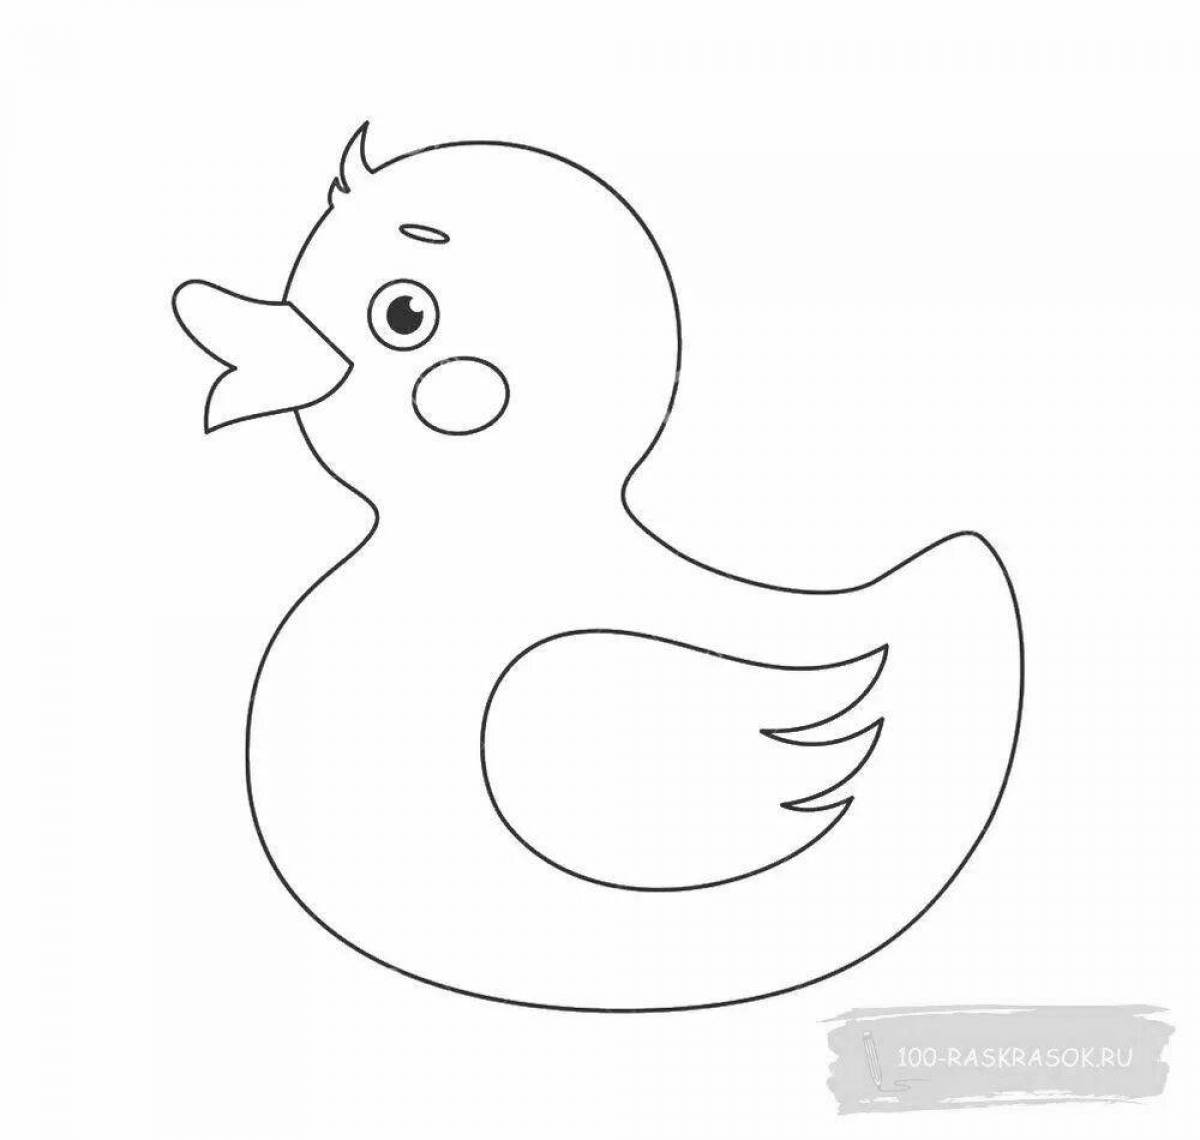 Smart Dymkovo toy duck coloring book for children